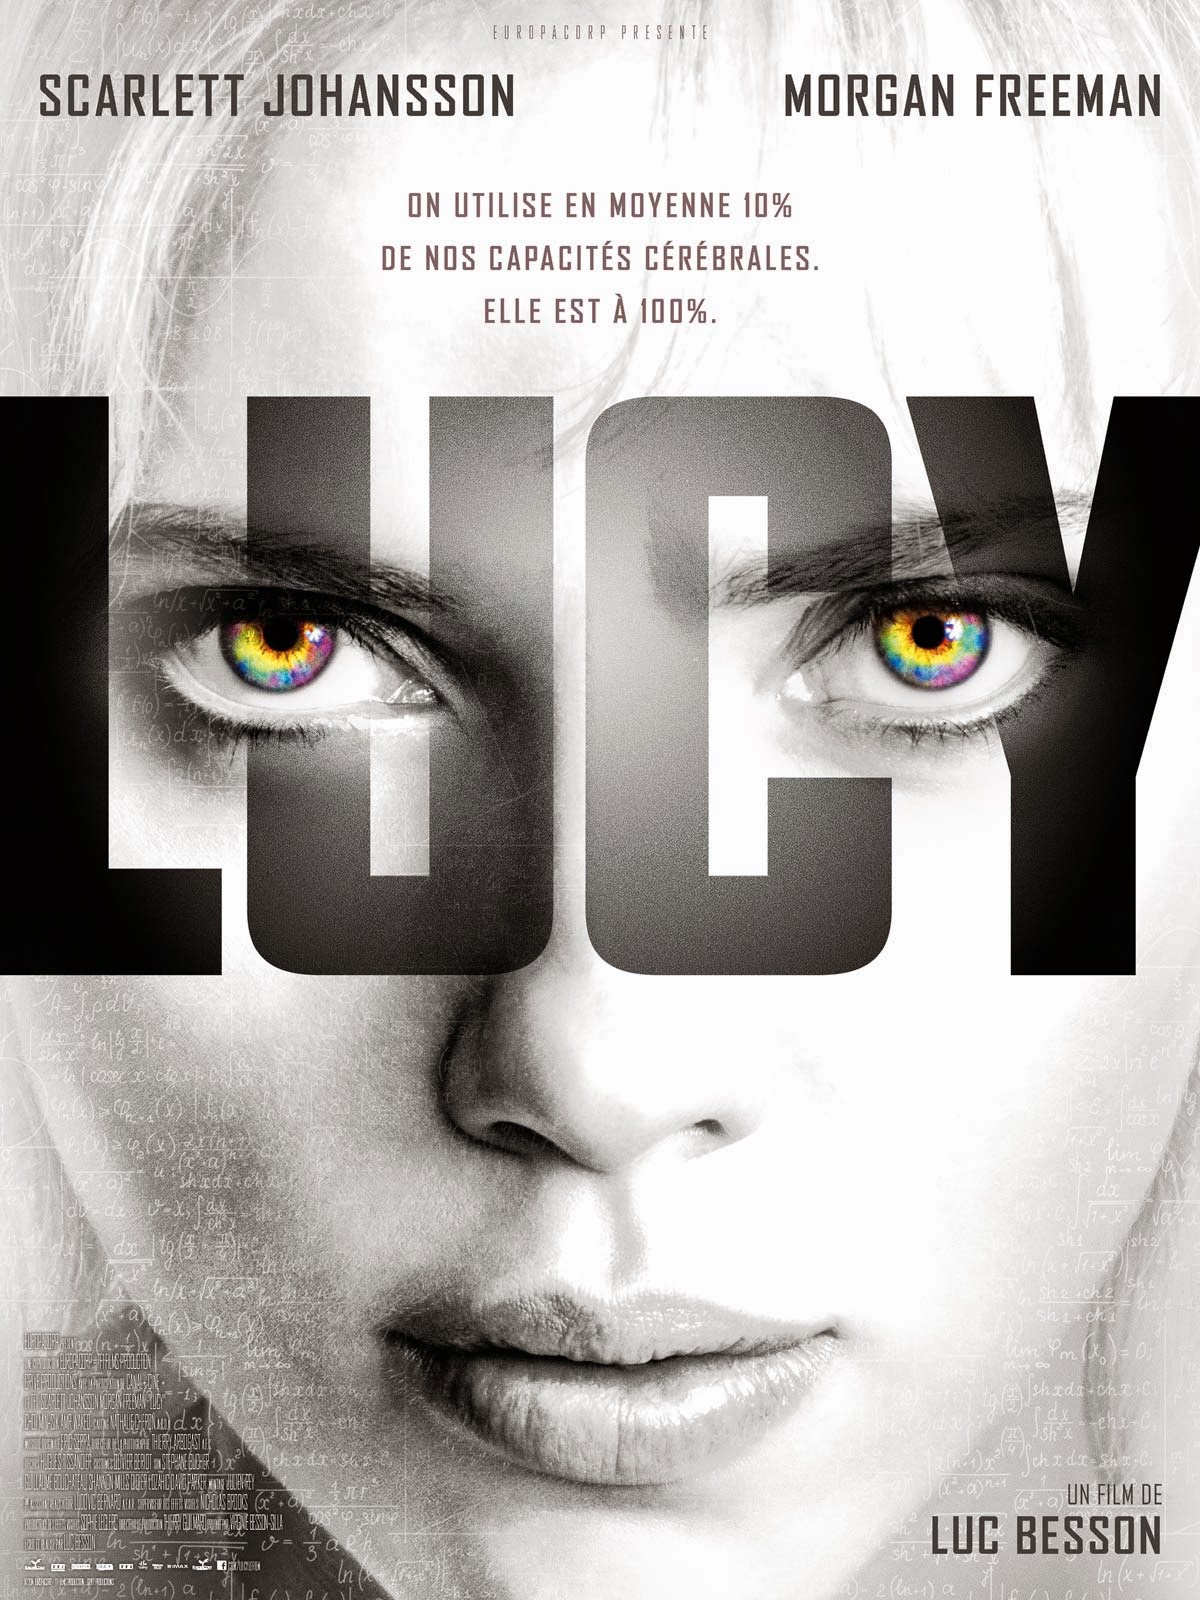 http://fuckingcinephiles.blogspot.fr/2014/08/critique-lucy.html